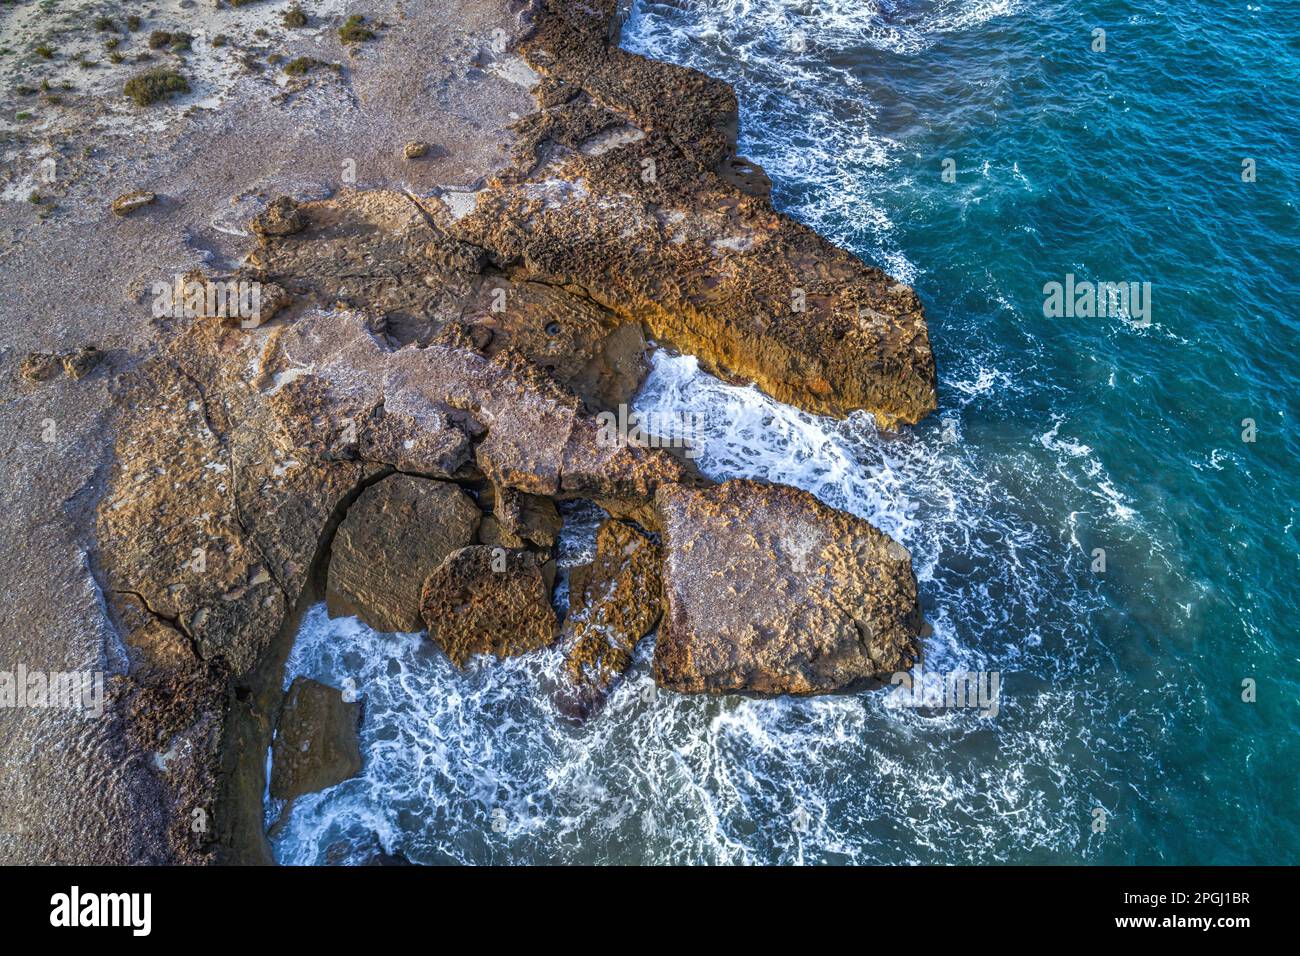 Cittadella dei Maccari beach is located at the extreme southern tip of the Vendicari nature reserve. Syracuse, Sicily, Italy, Europe Stock Photo